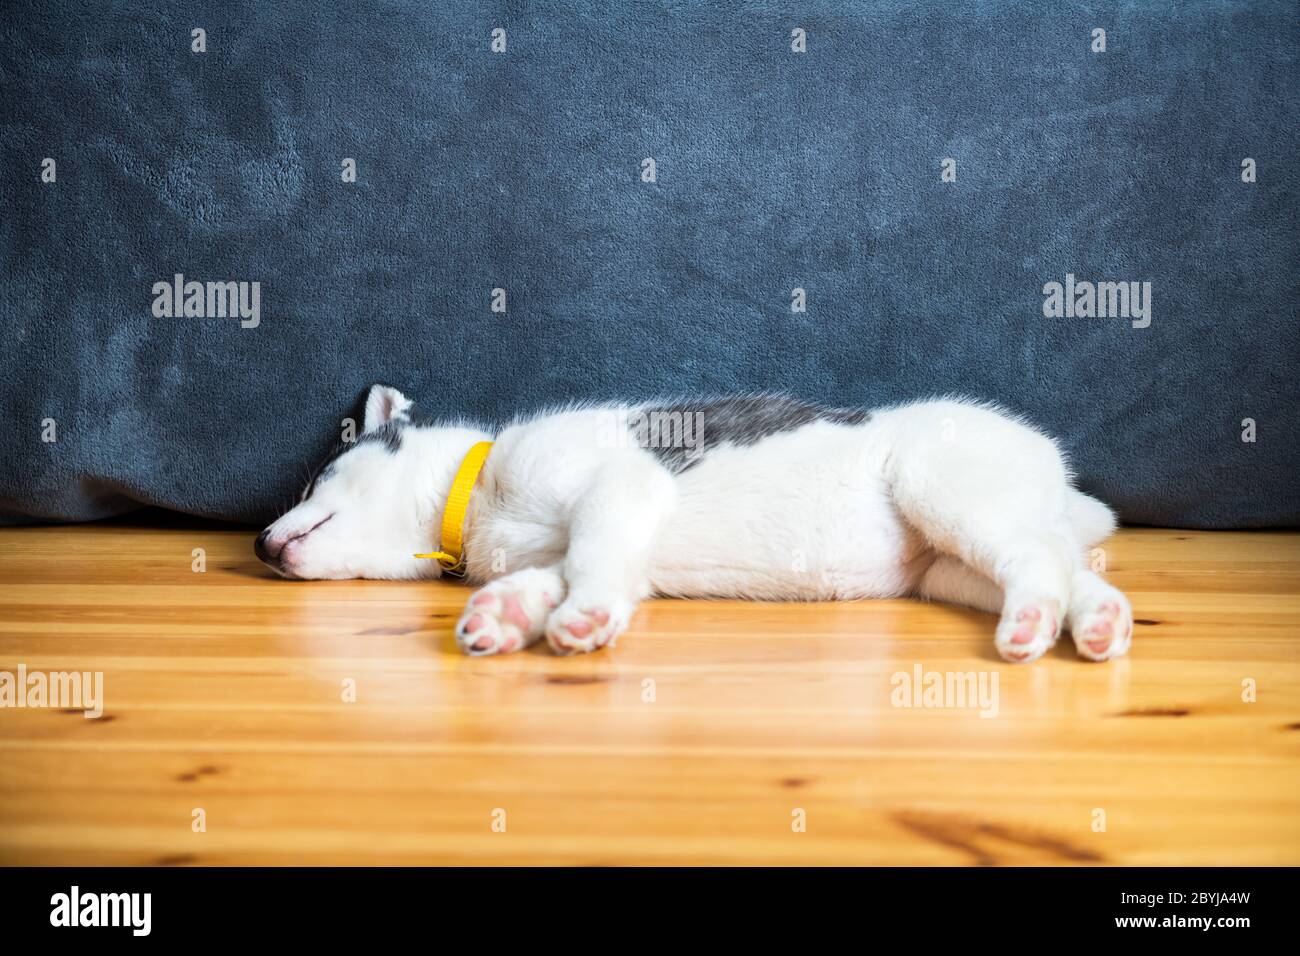 A small white dog puppy breed siberian husky with beautiful blue eyes lays on wooden floor. Dogs and pets photography Stock Photo